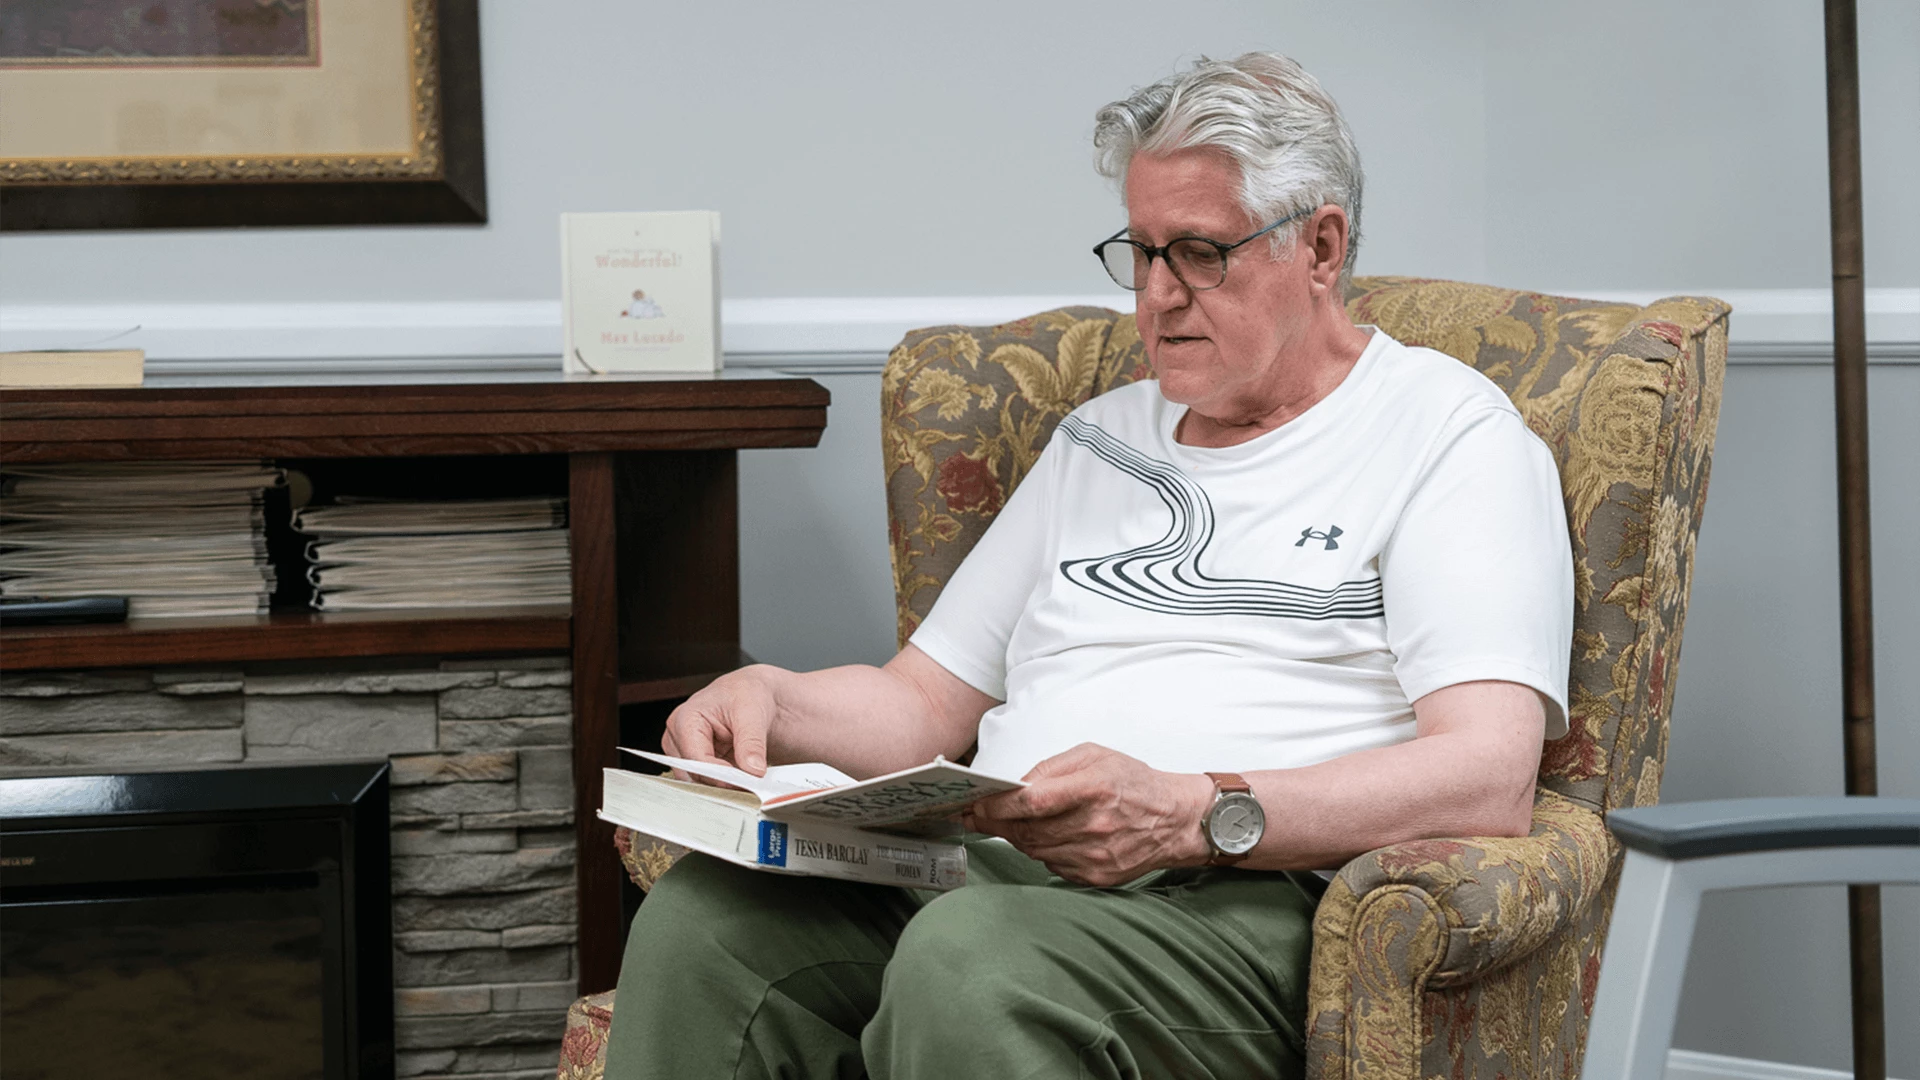 An elderly person reading a book while sitting on sofa